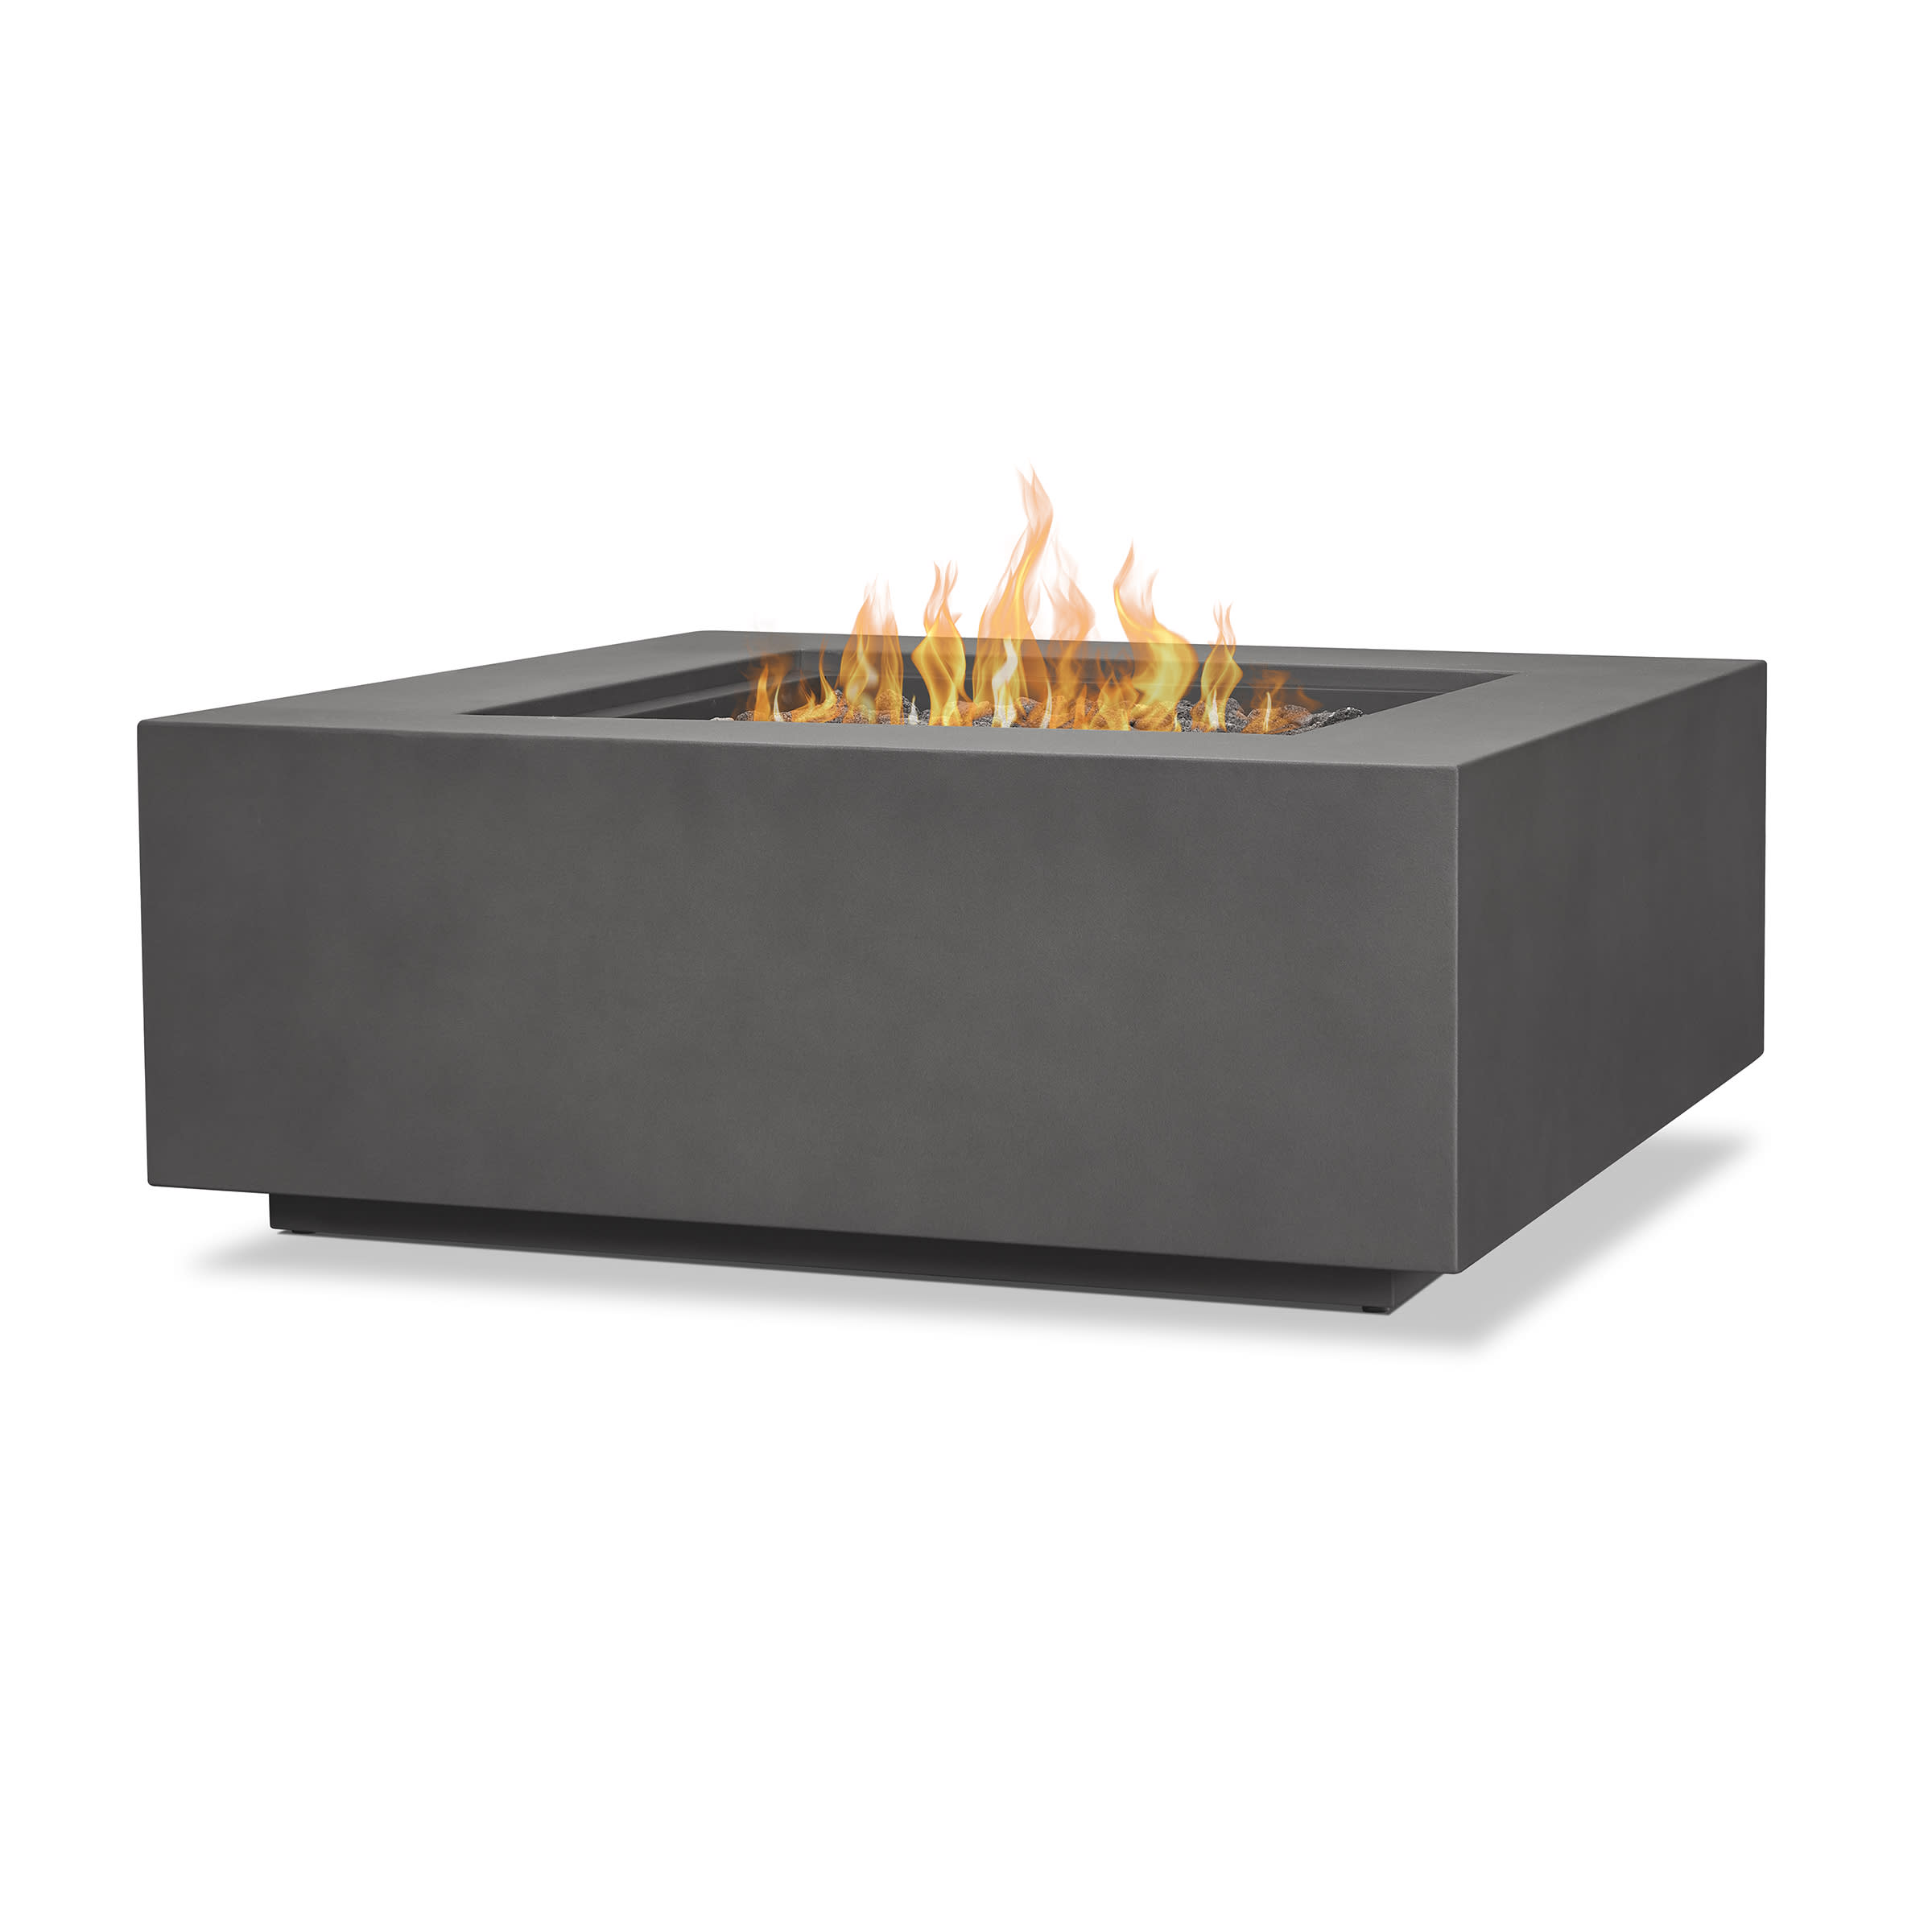 Real Flame C9812lp Wslt Weathered Slate Aegean 36 Inch Wide 50 000 Btu Freestanding Liquid Propane Natural Gas Square Table Fire Pit Ventingpipe Com